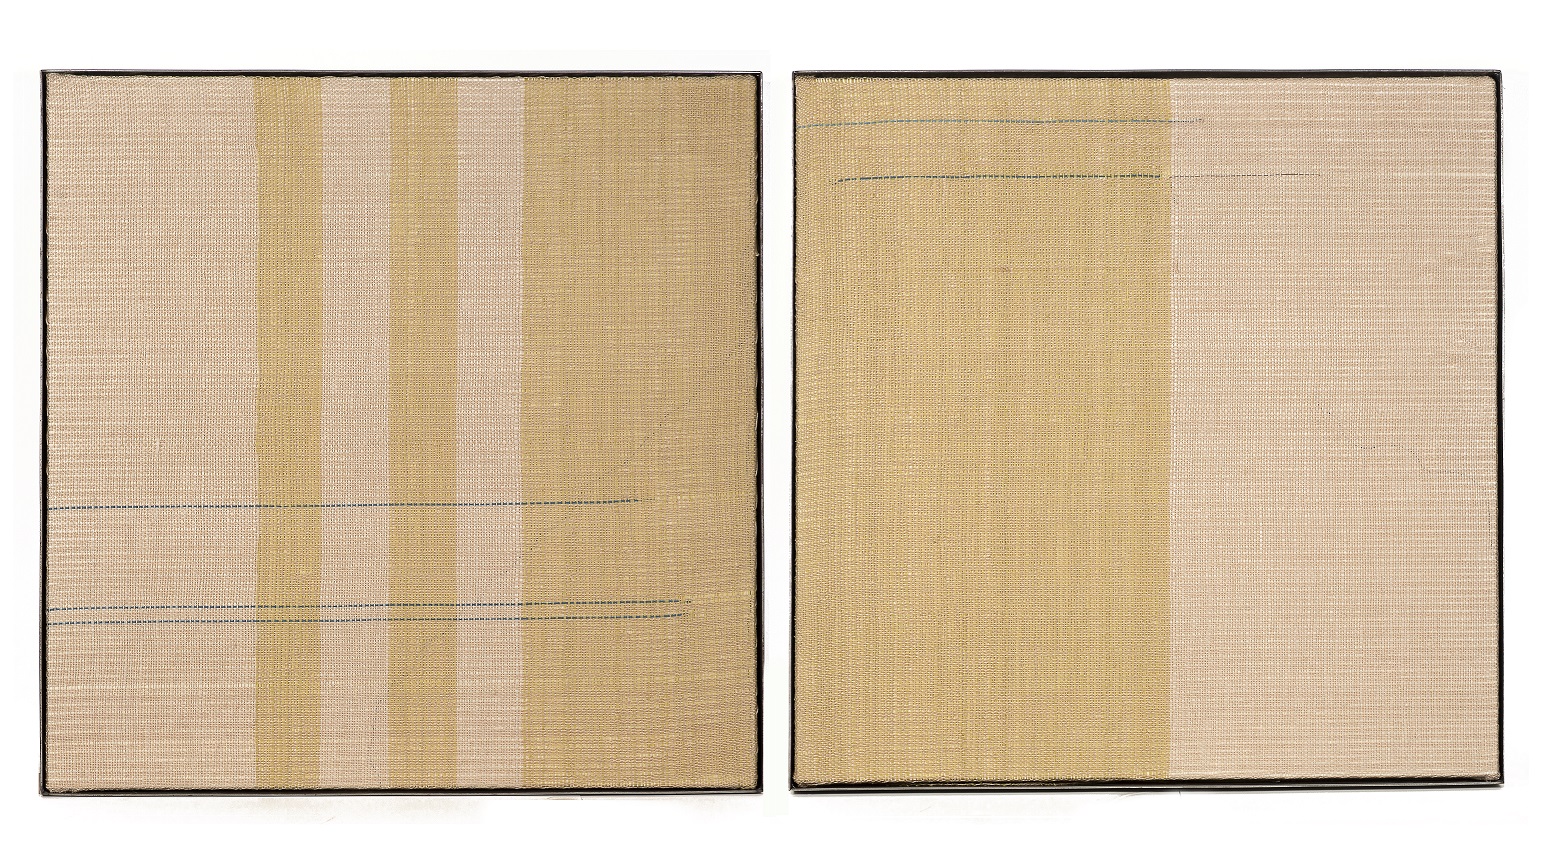 
							

									Elizabeth Hohimer									Laying halfway in the shade 2021									dirt-dyed cotton tapestry in steel frame<br />
36 x 36 x 2 1/2 inches each									


							